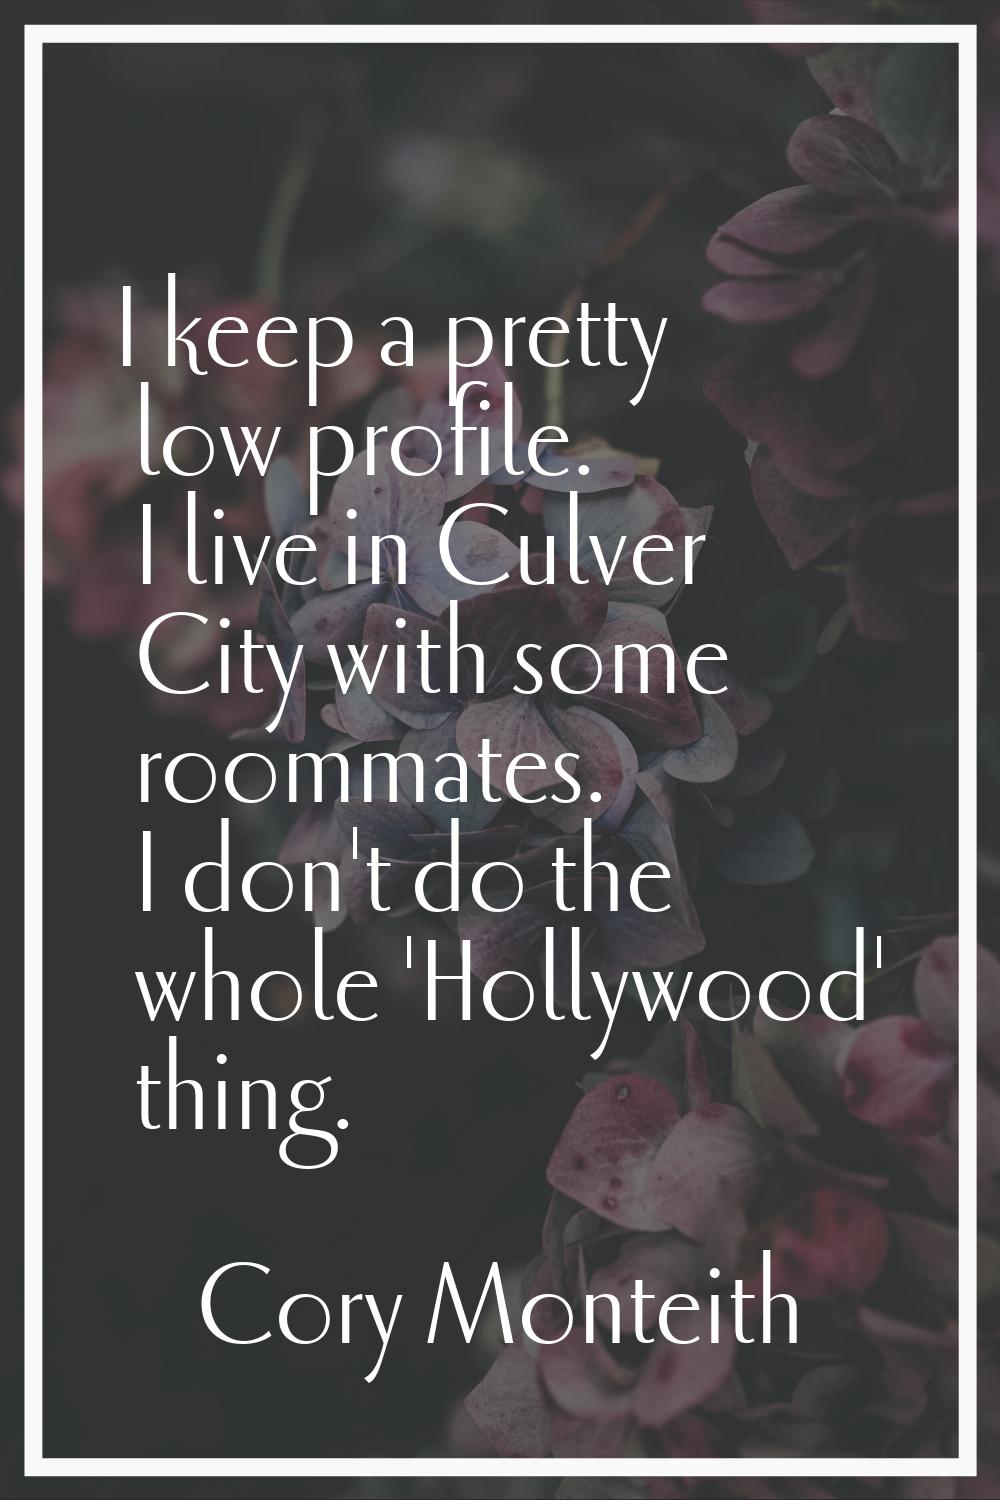 I keep a pretty low profile. I live in Culver City with some roommates. I don't do the whole 'Holly